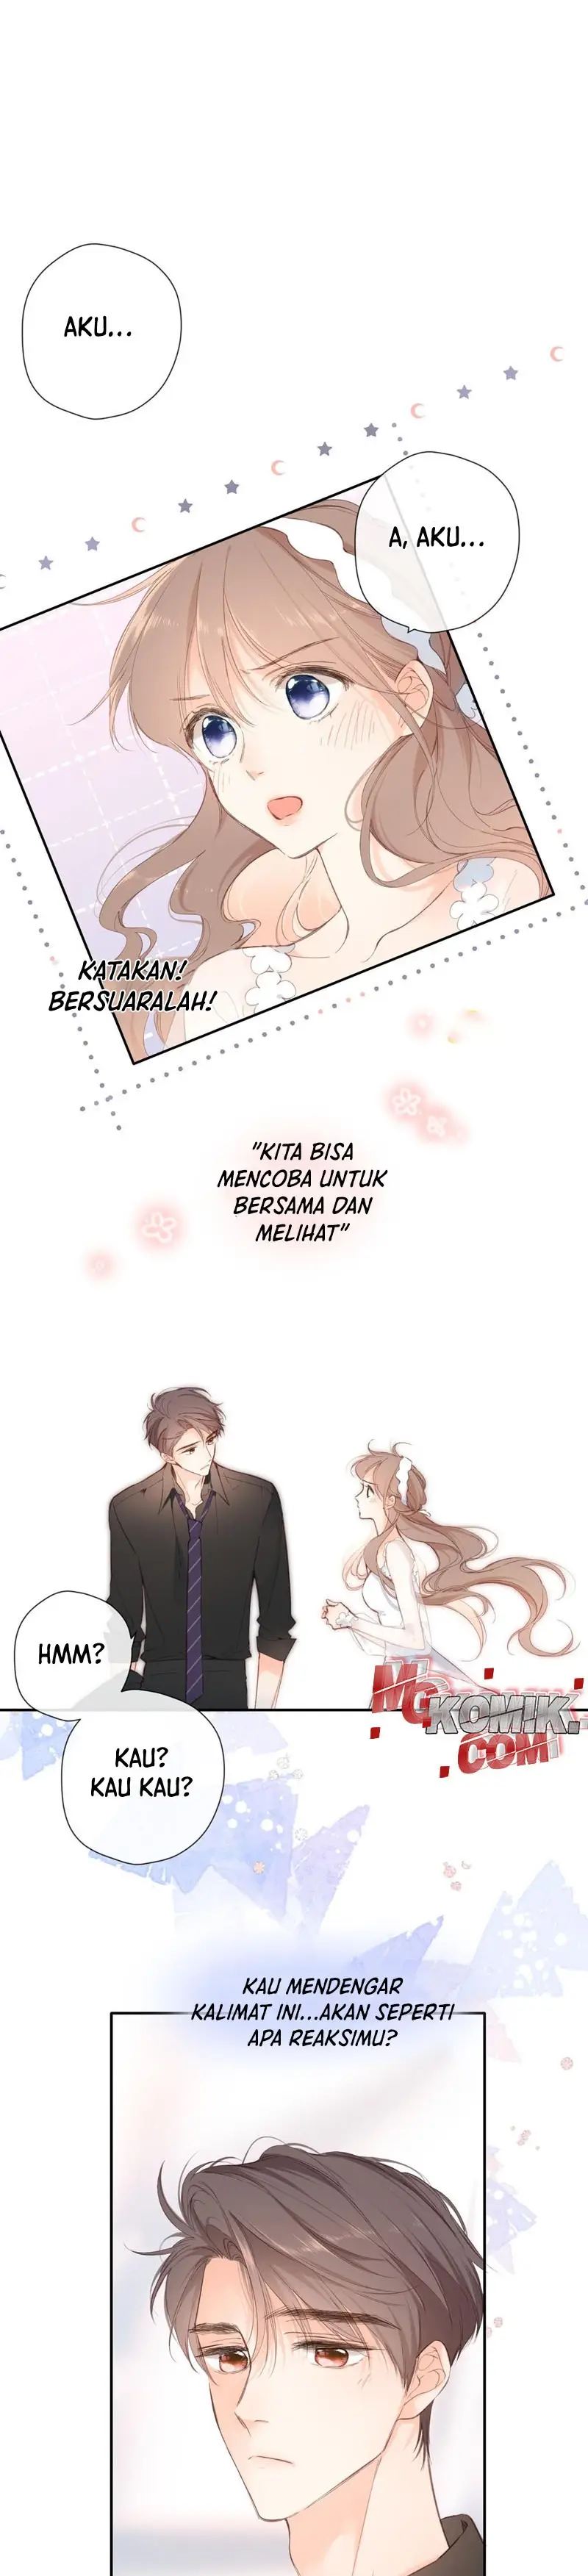 Once More Chapter 146 - 147